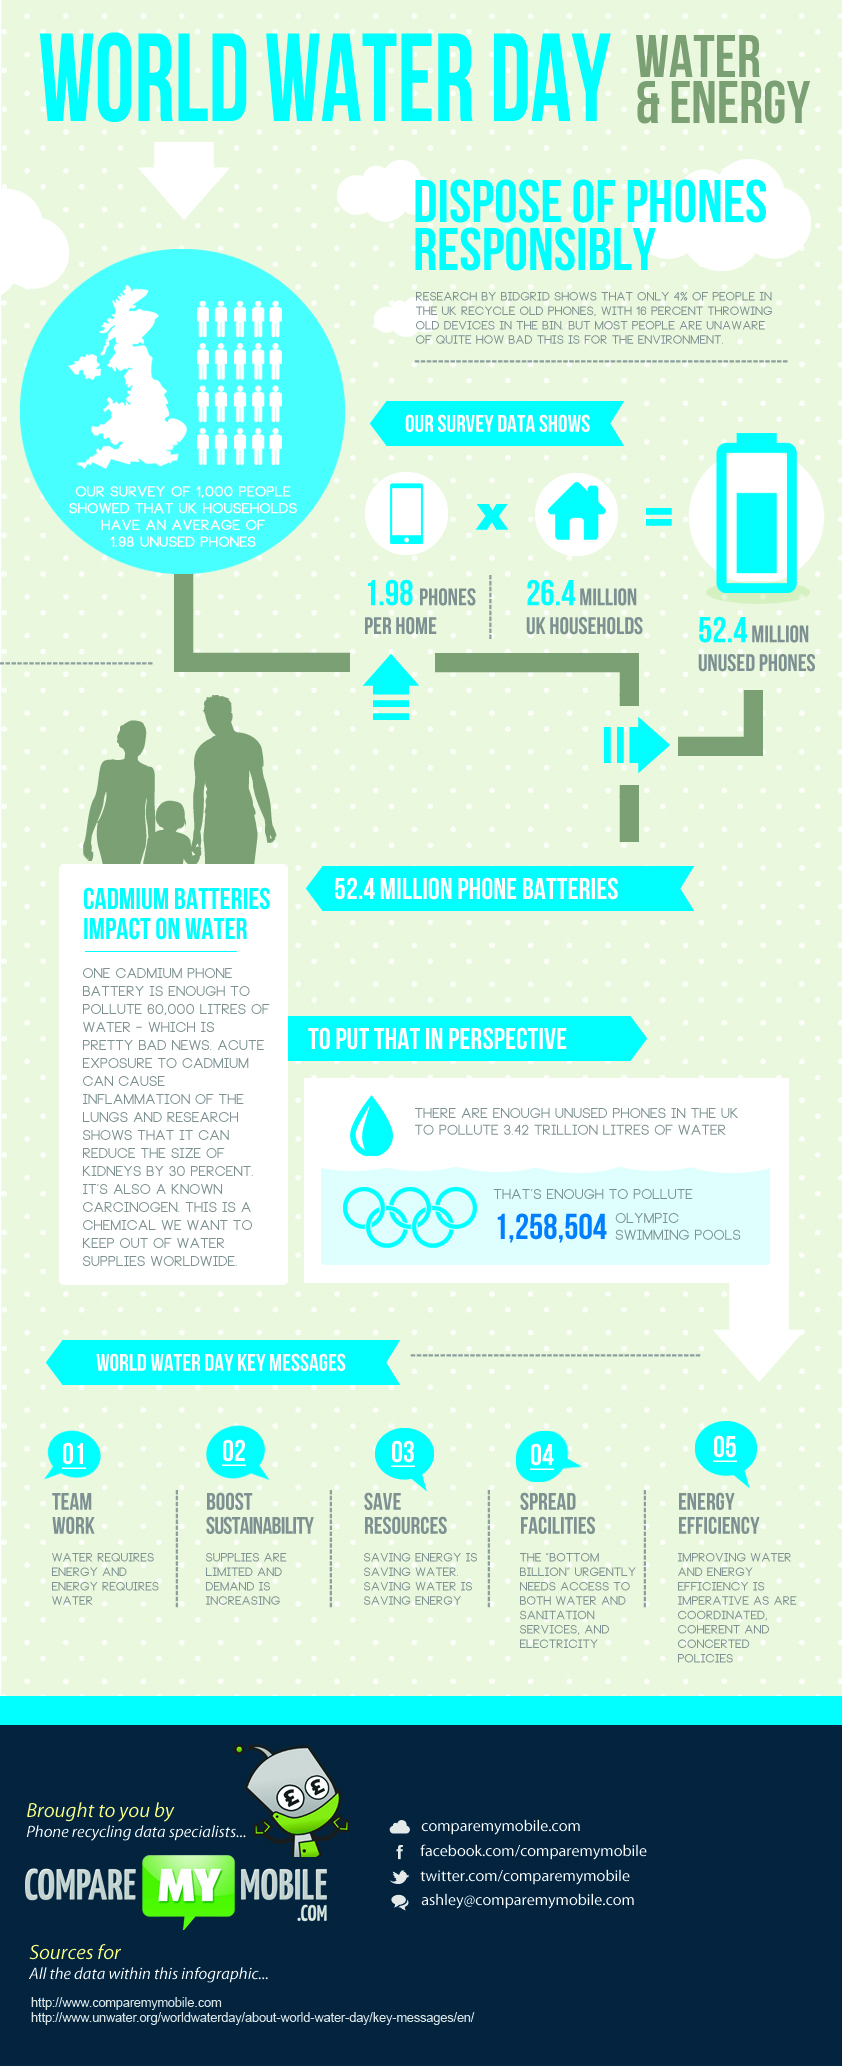 World Water Day 2014 infographic